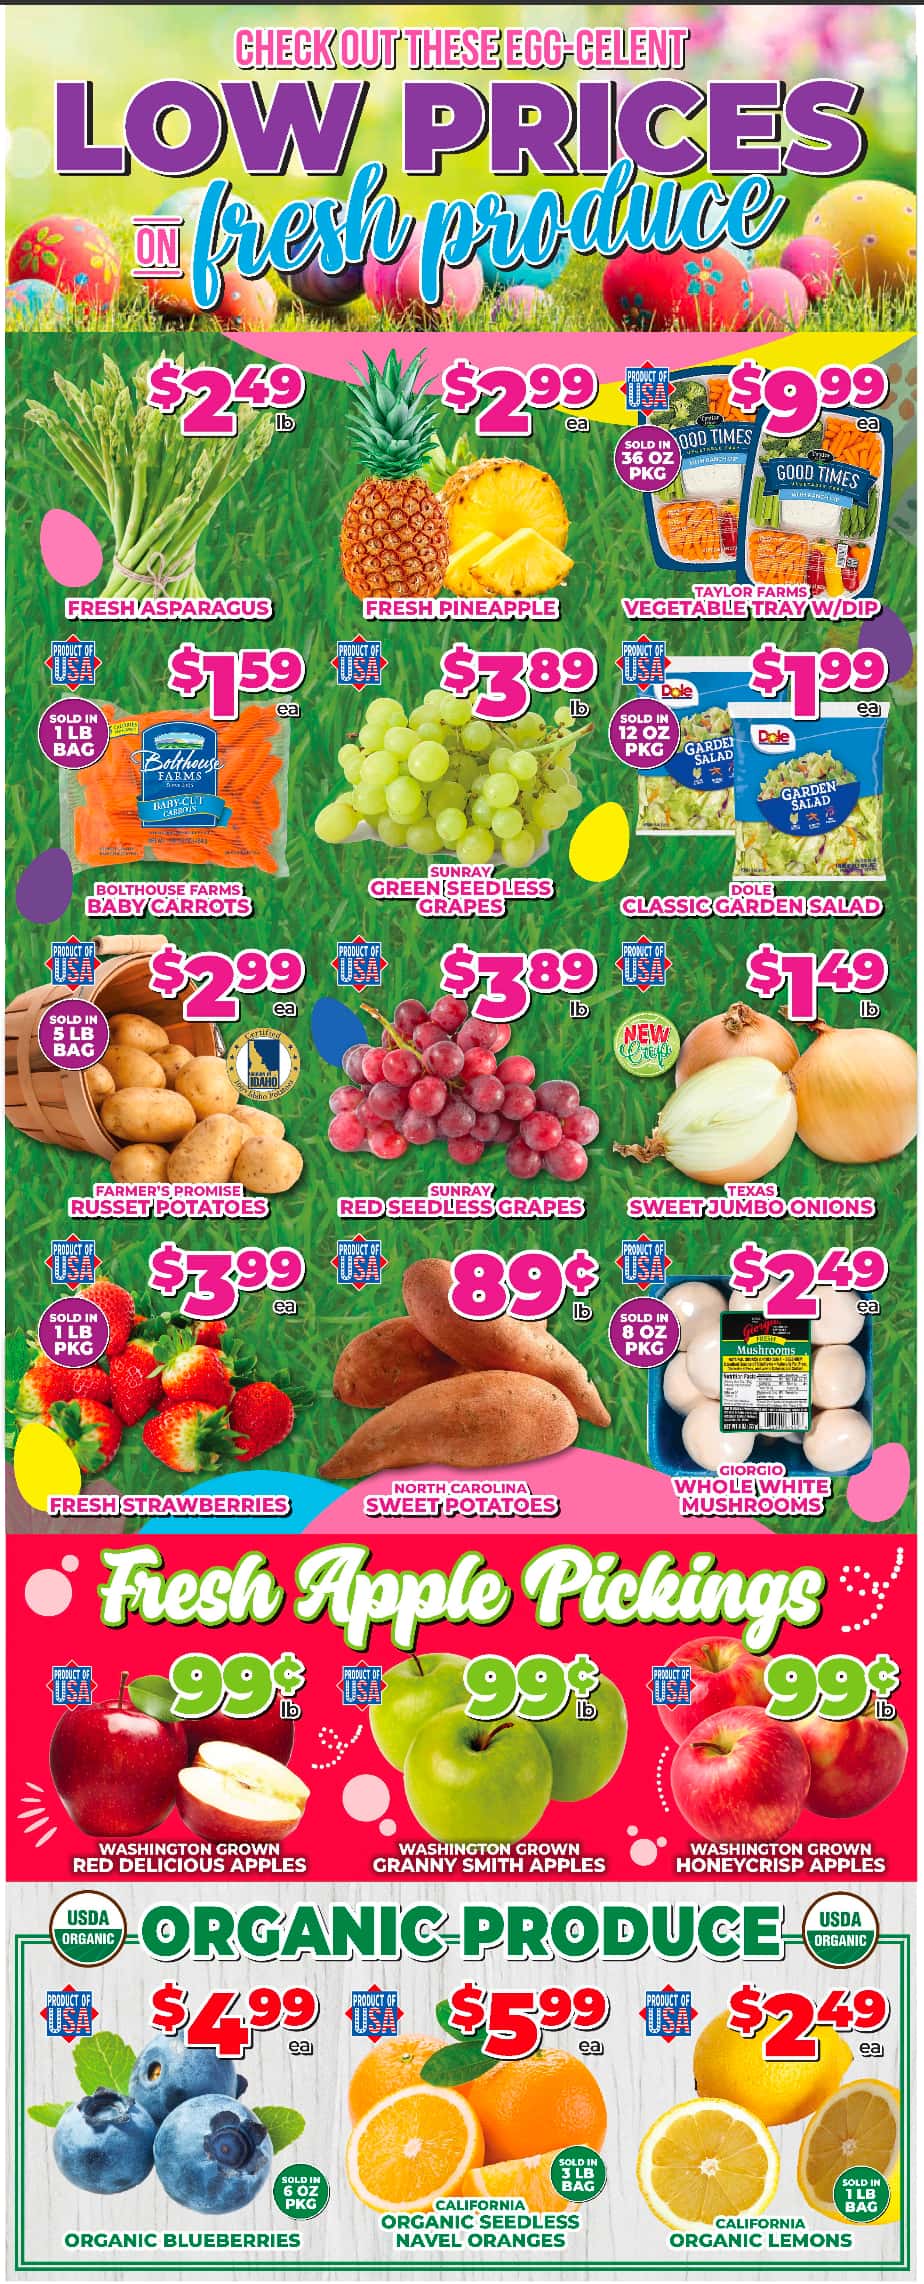 PriceCutter_weekly_ad_032724_02